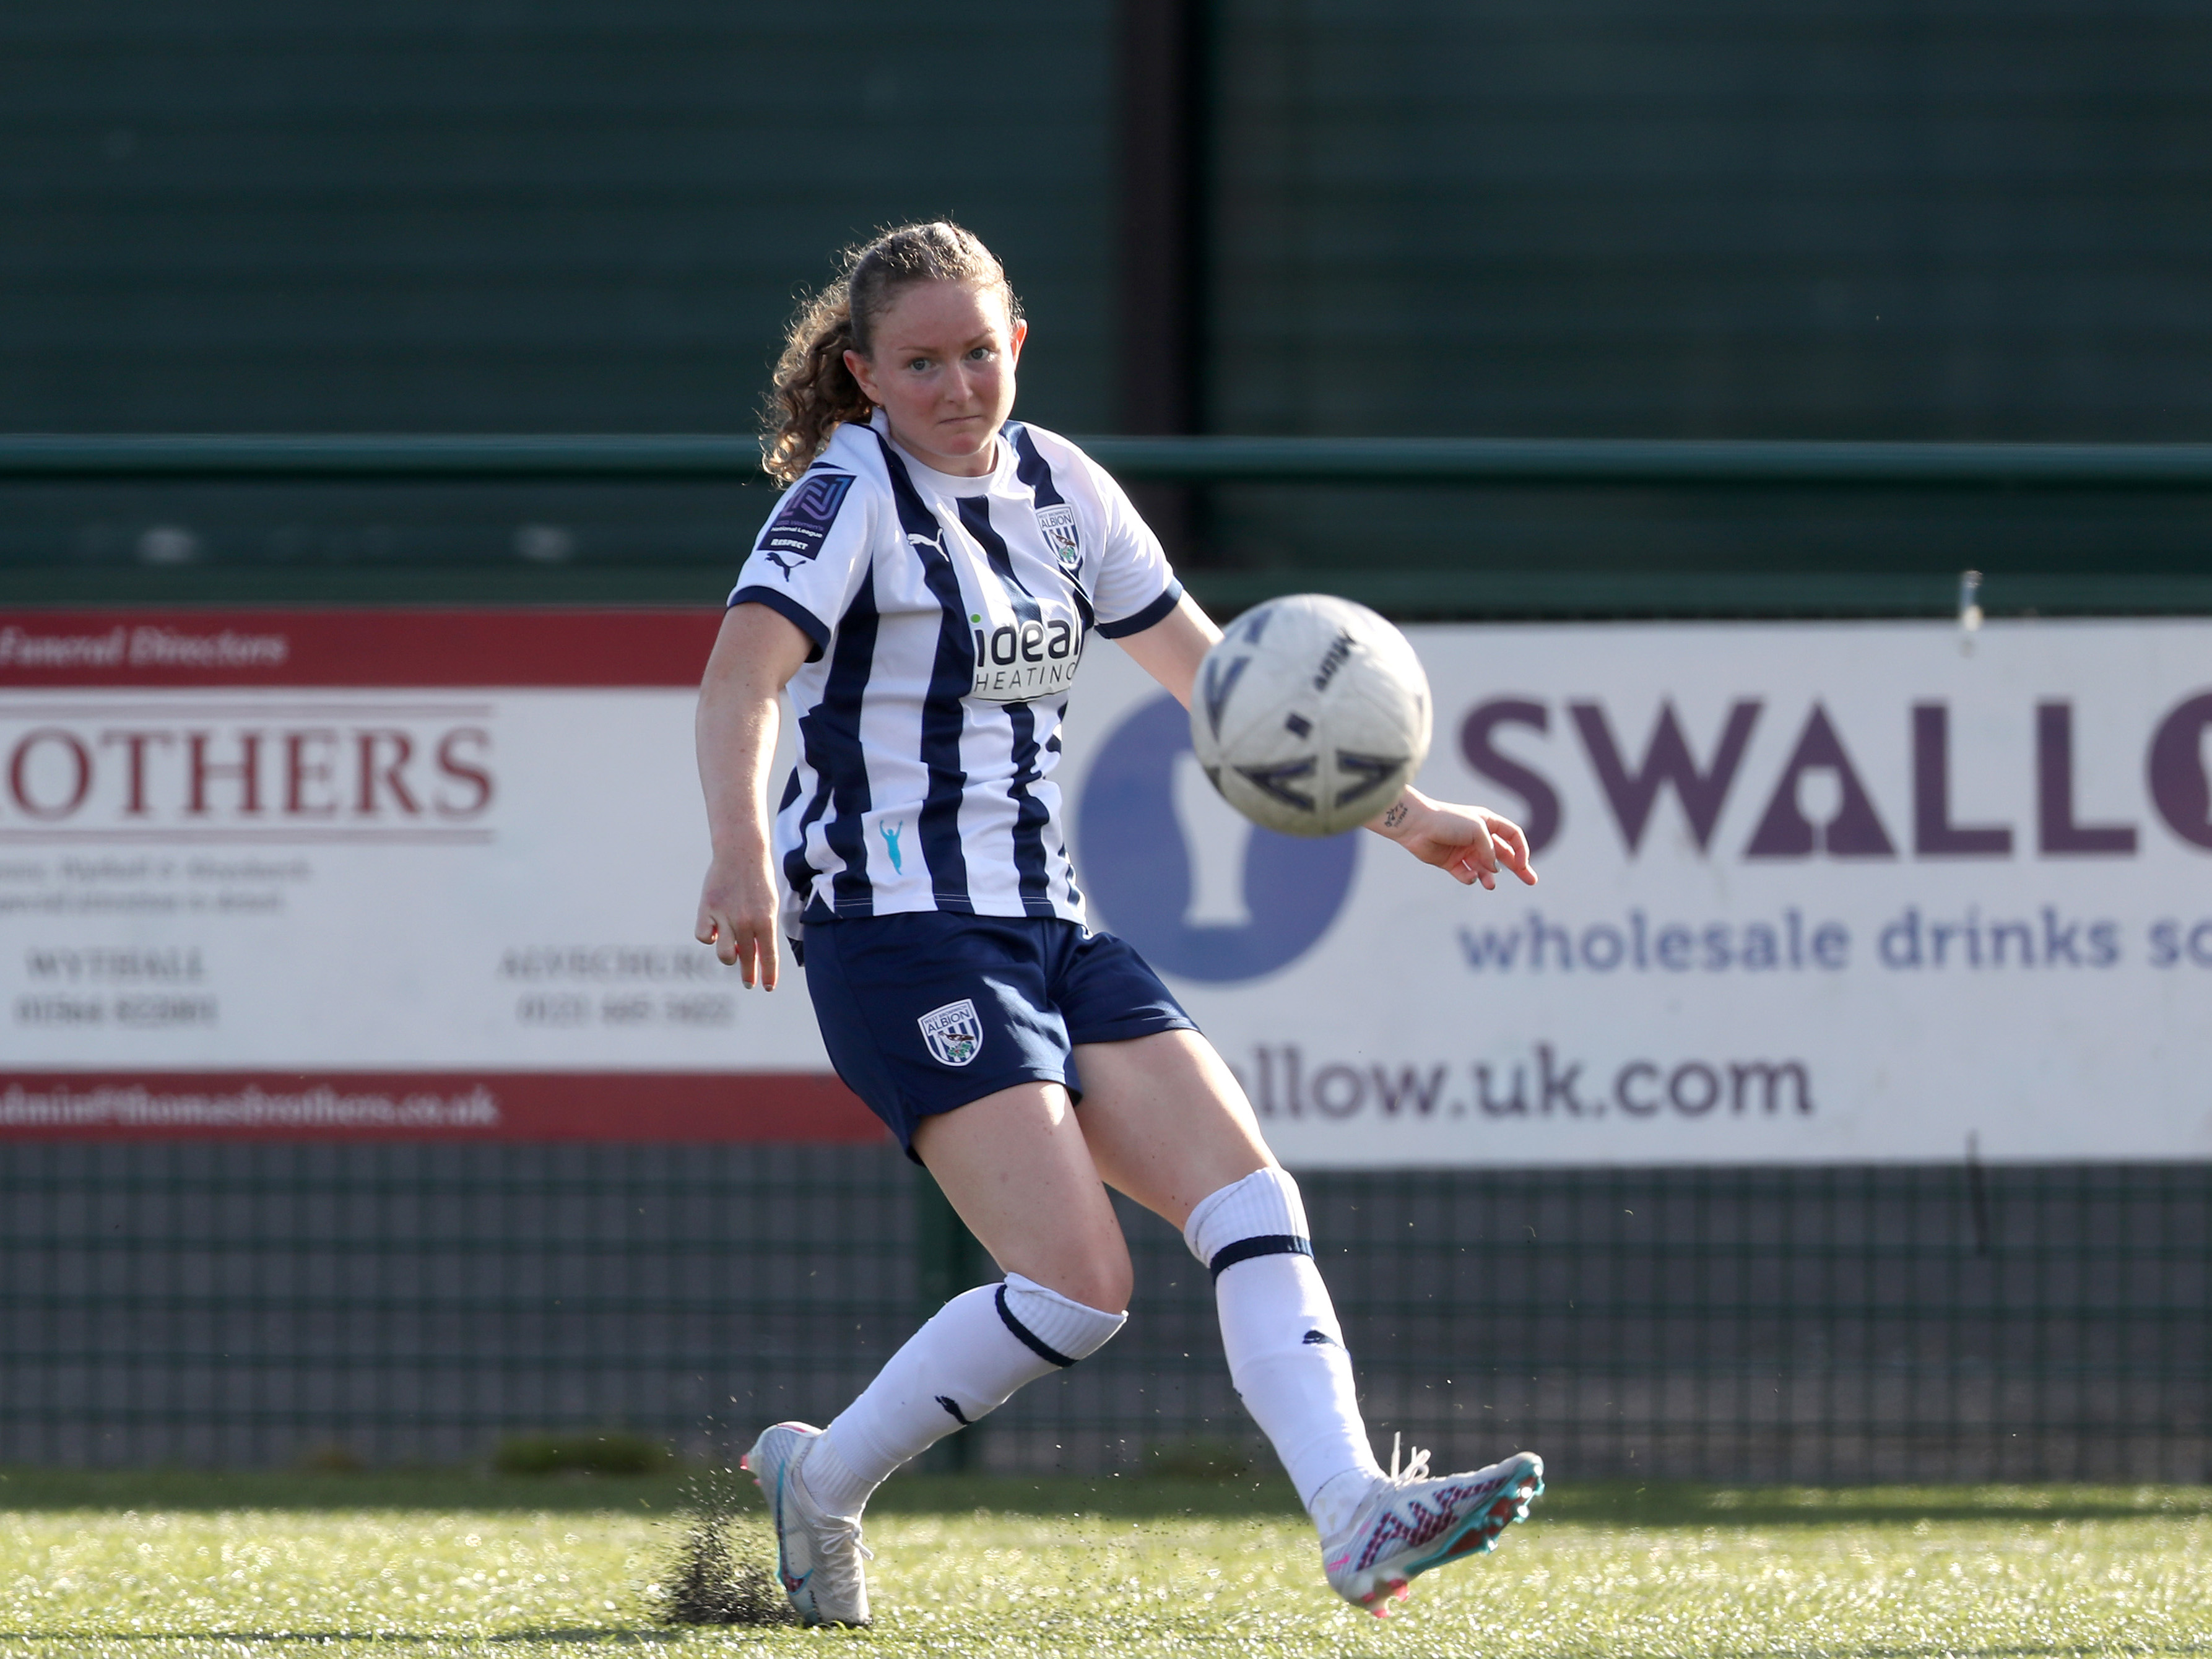 A photo of Albion Women's player Olivia Rabjohn on the ball at Redditch United's ground